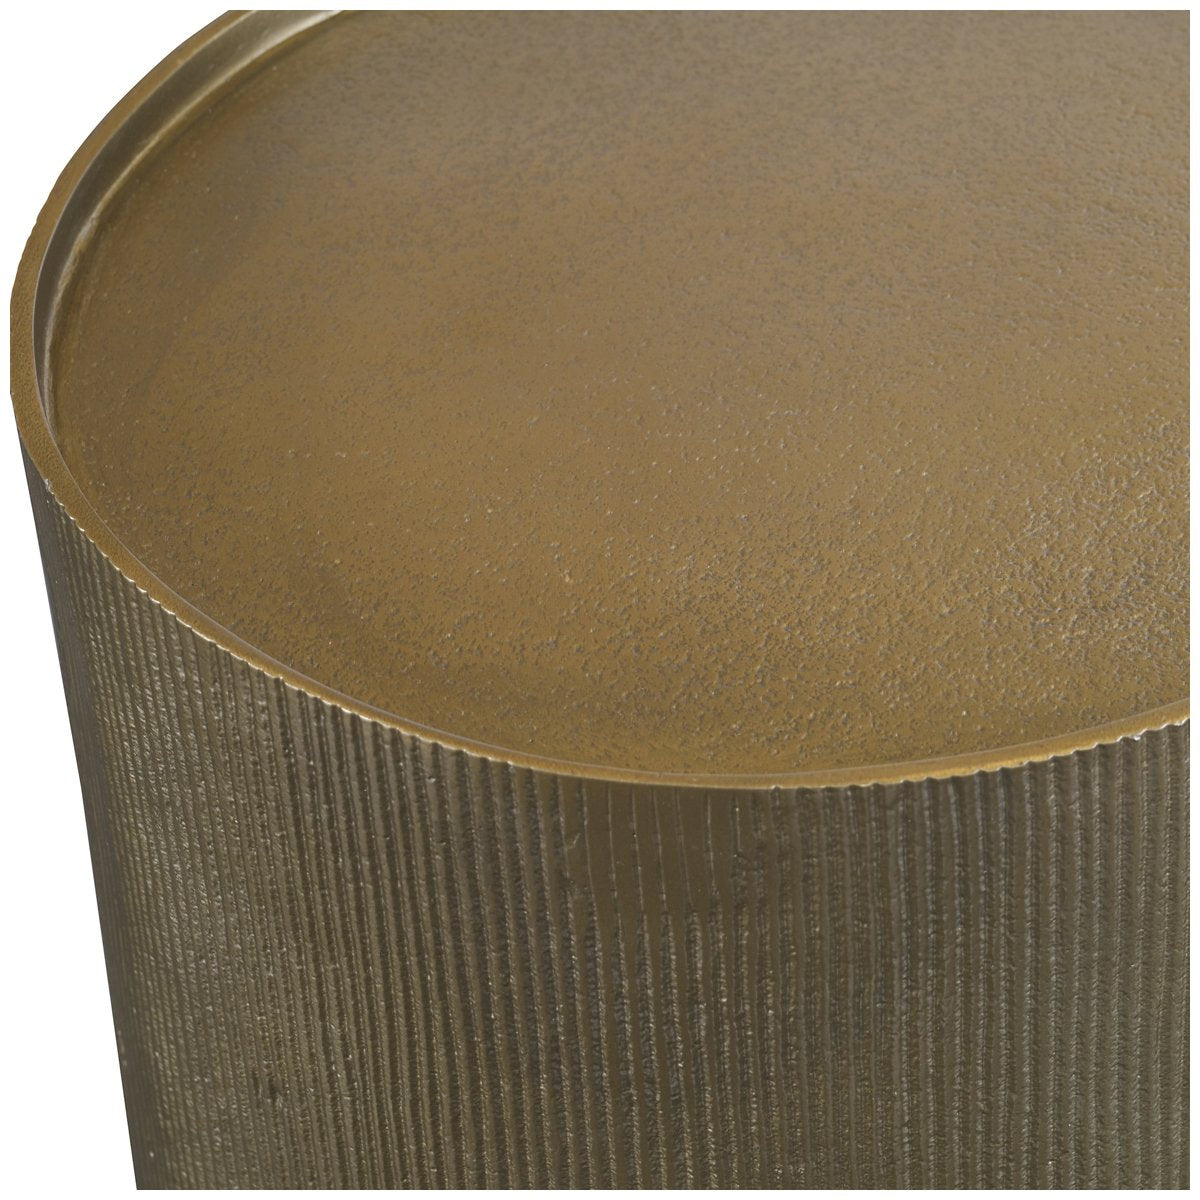 Uttermost Adrina Drum Accent Table